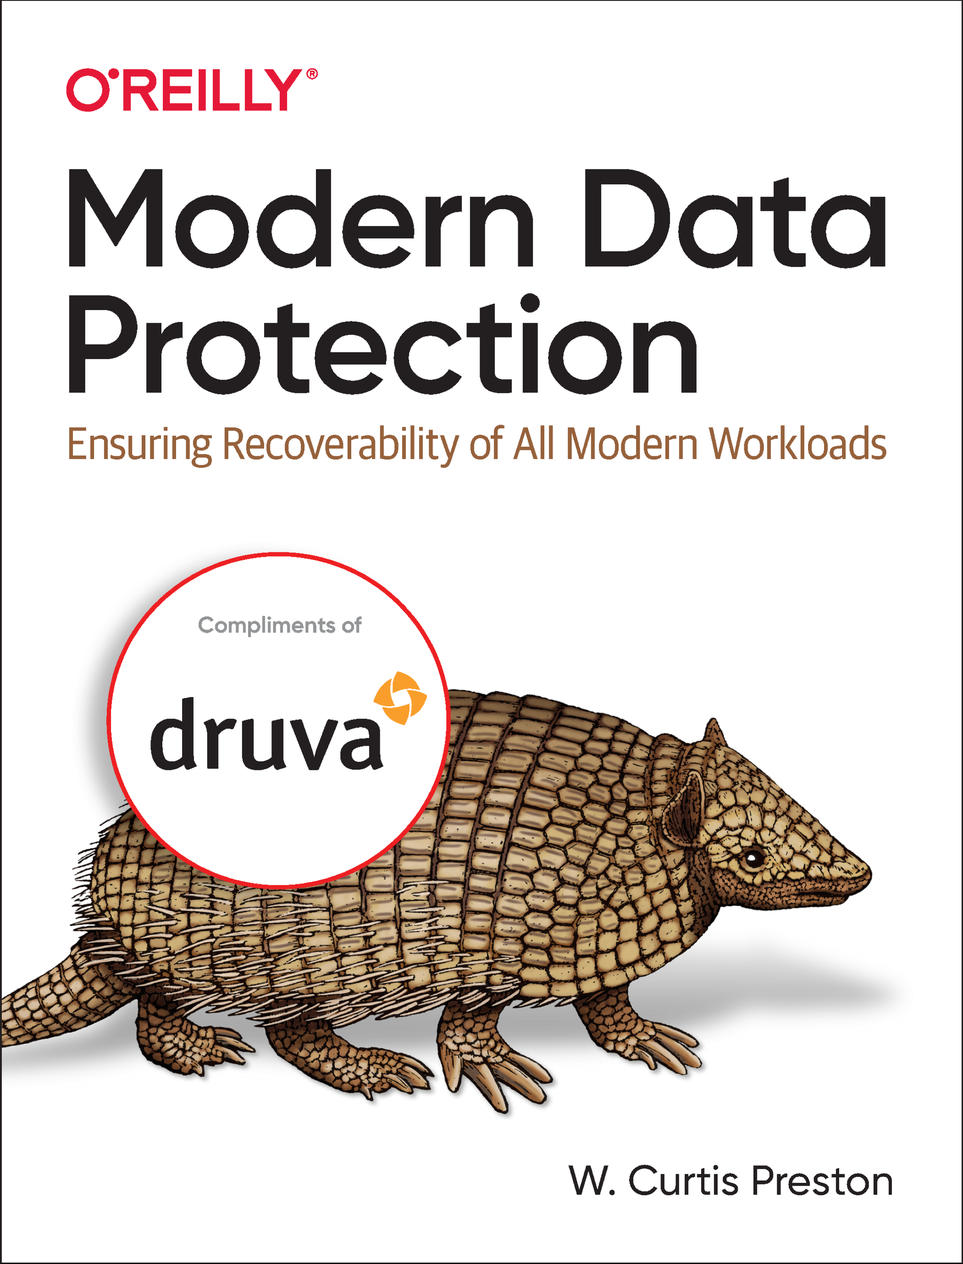 thumb-book-modern-data-protection-curtis.png